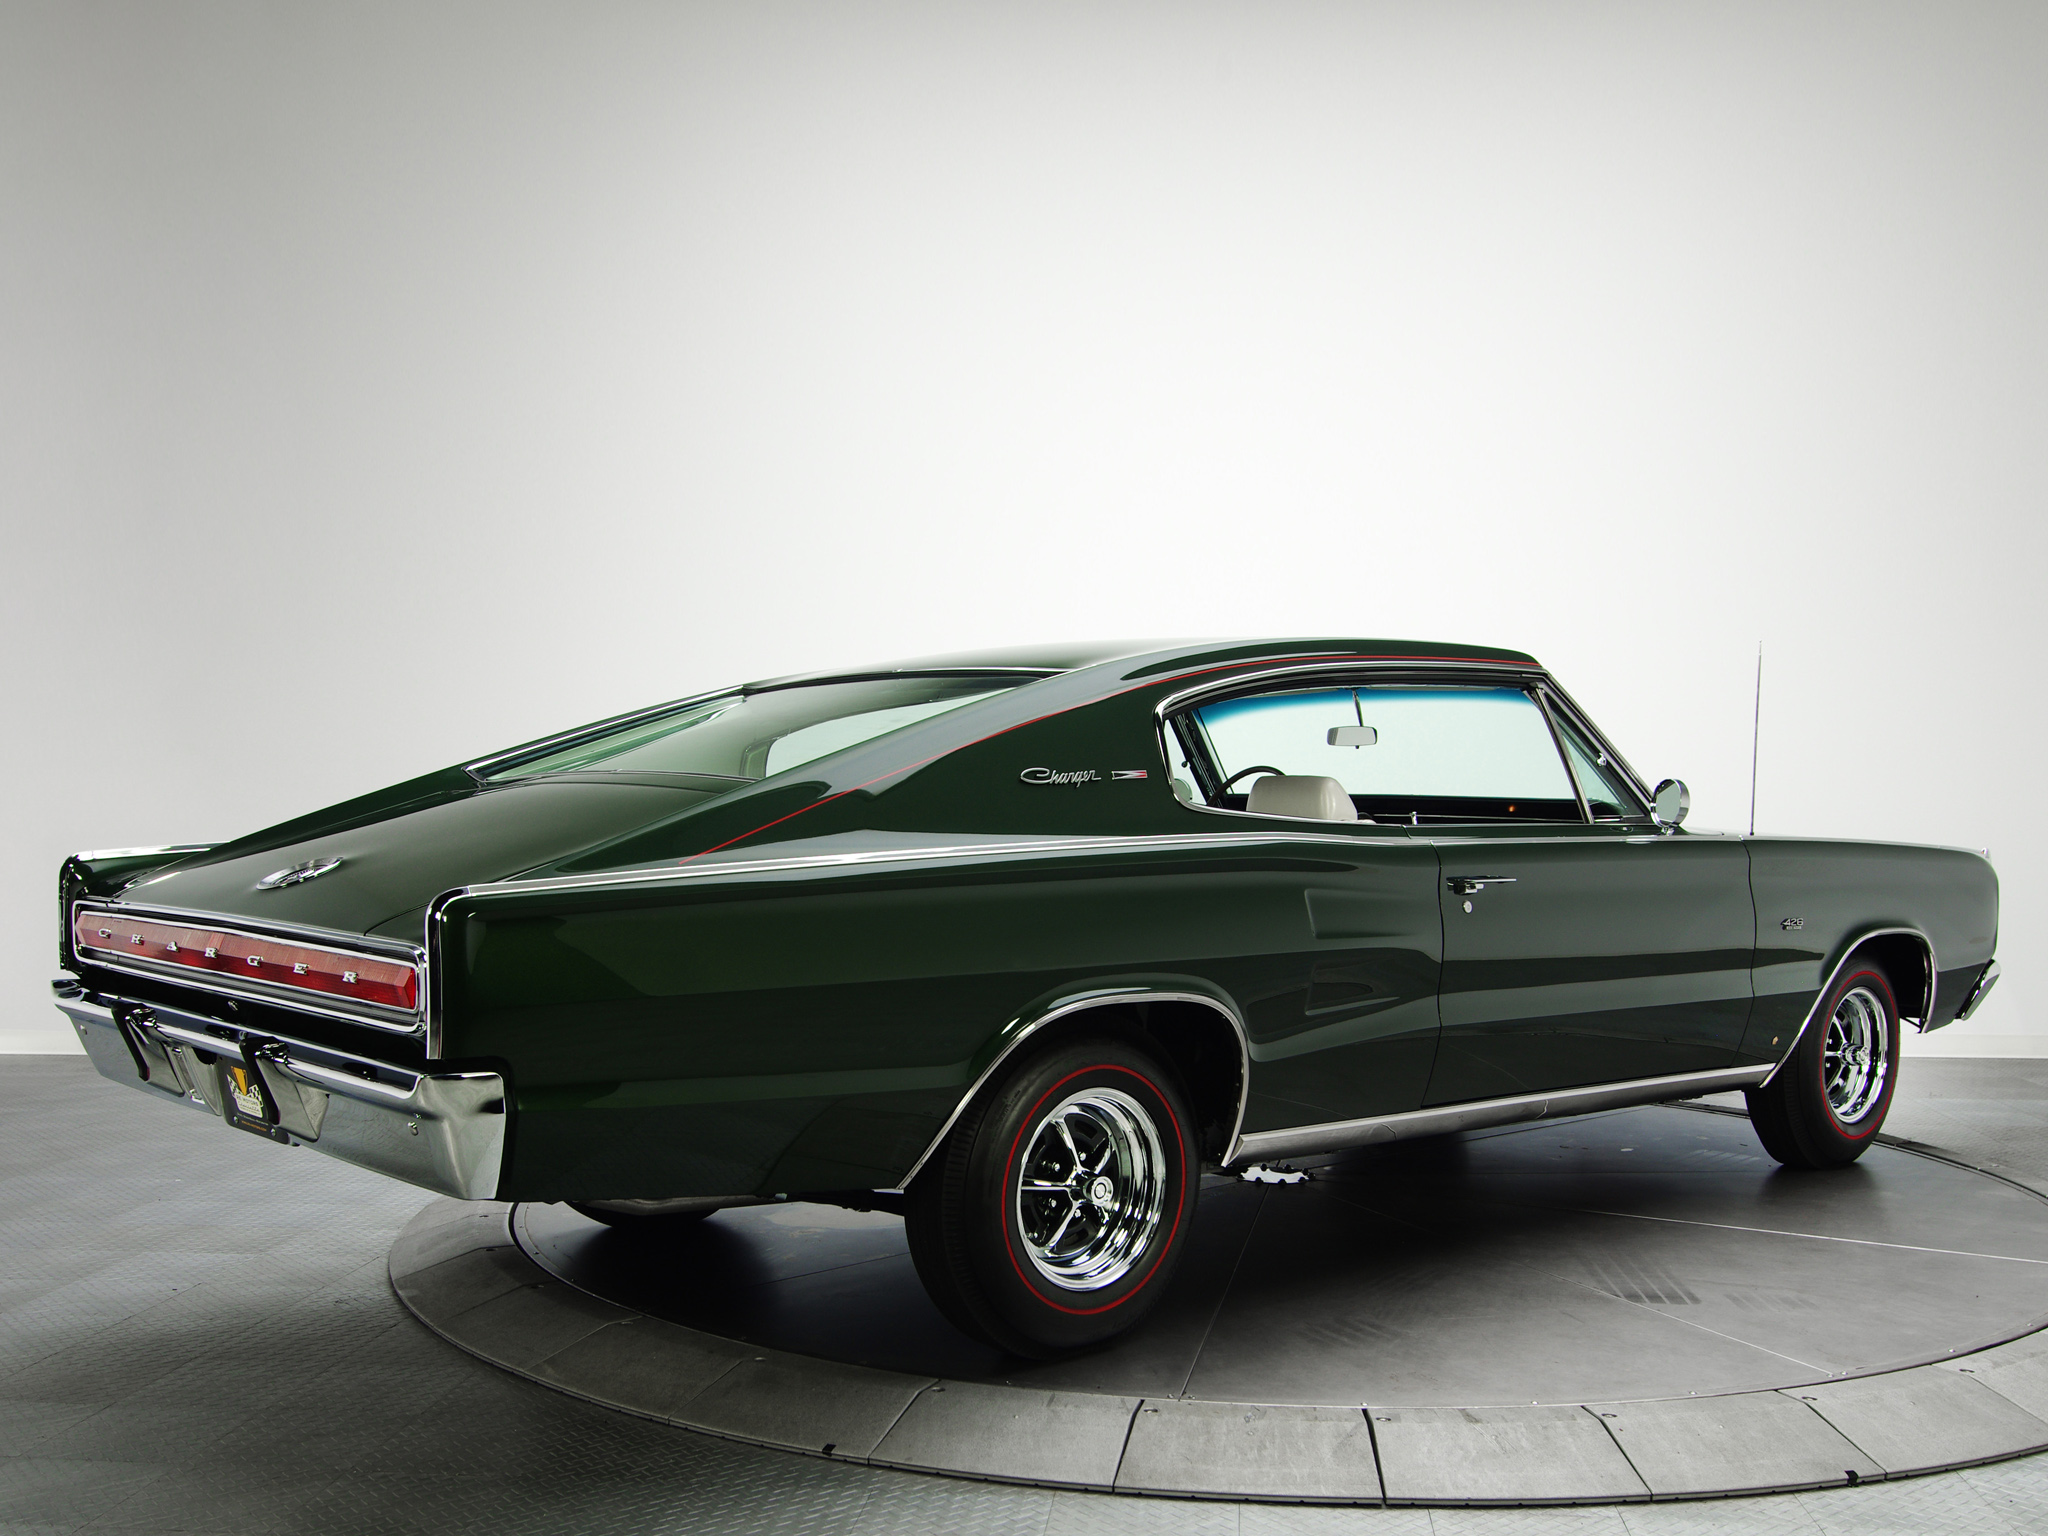 1967, Dodge, Charger, R t, 426, Hemi, Muscle, Classic Wallpaper